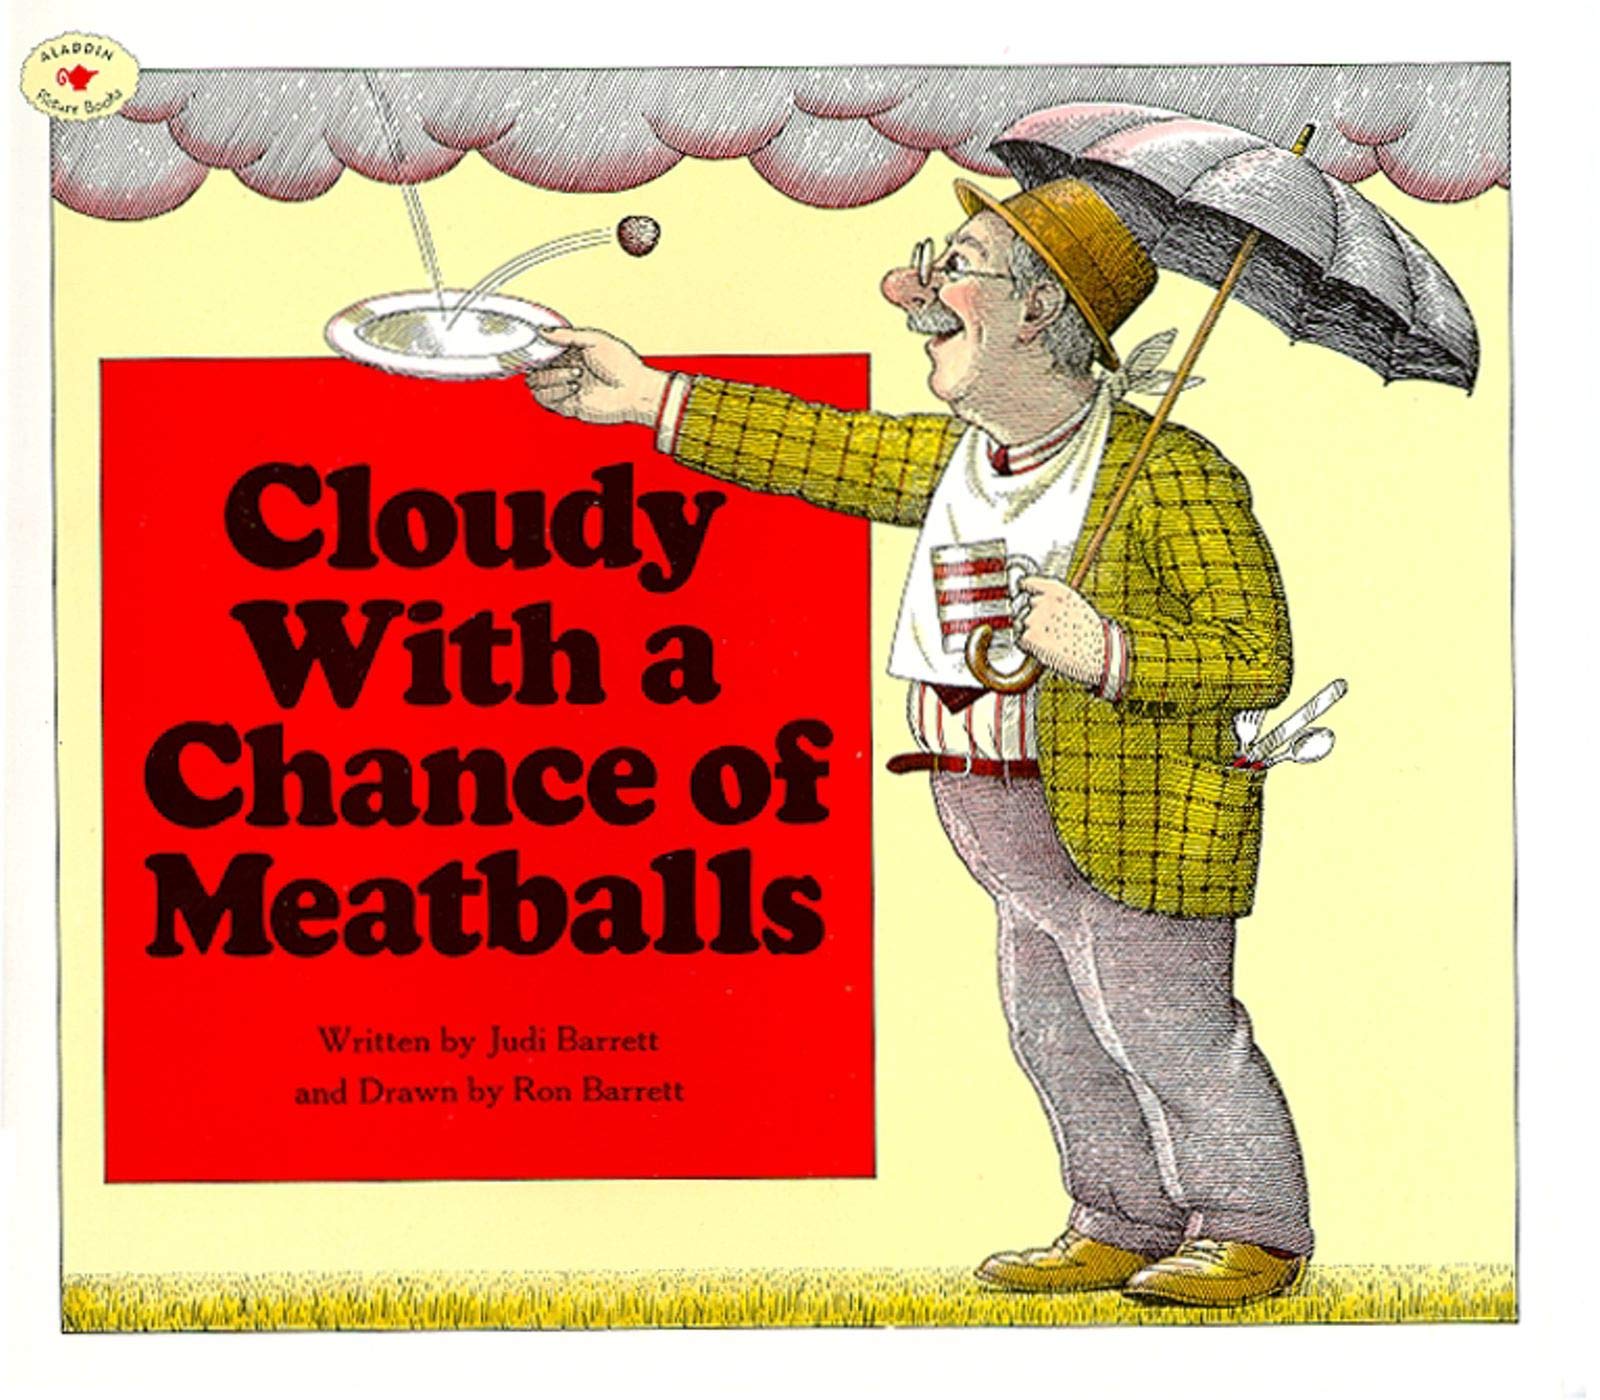 CLOUDY WITH A CHANCE OF MEETBALLS PB